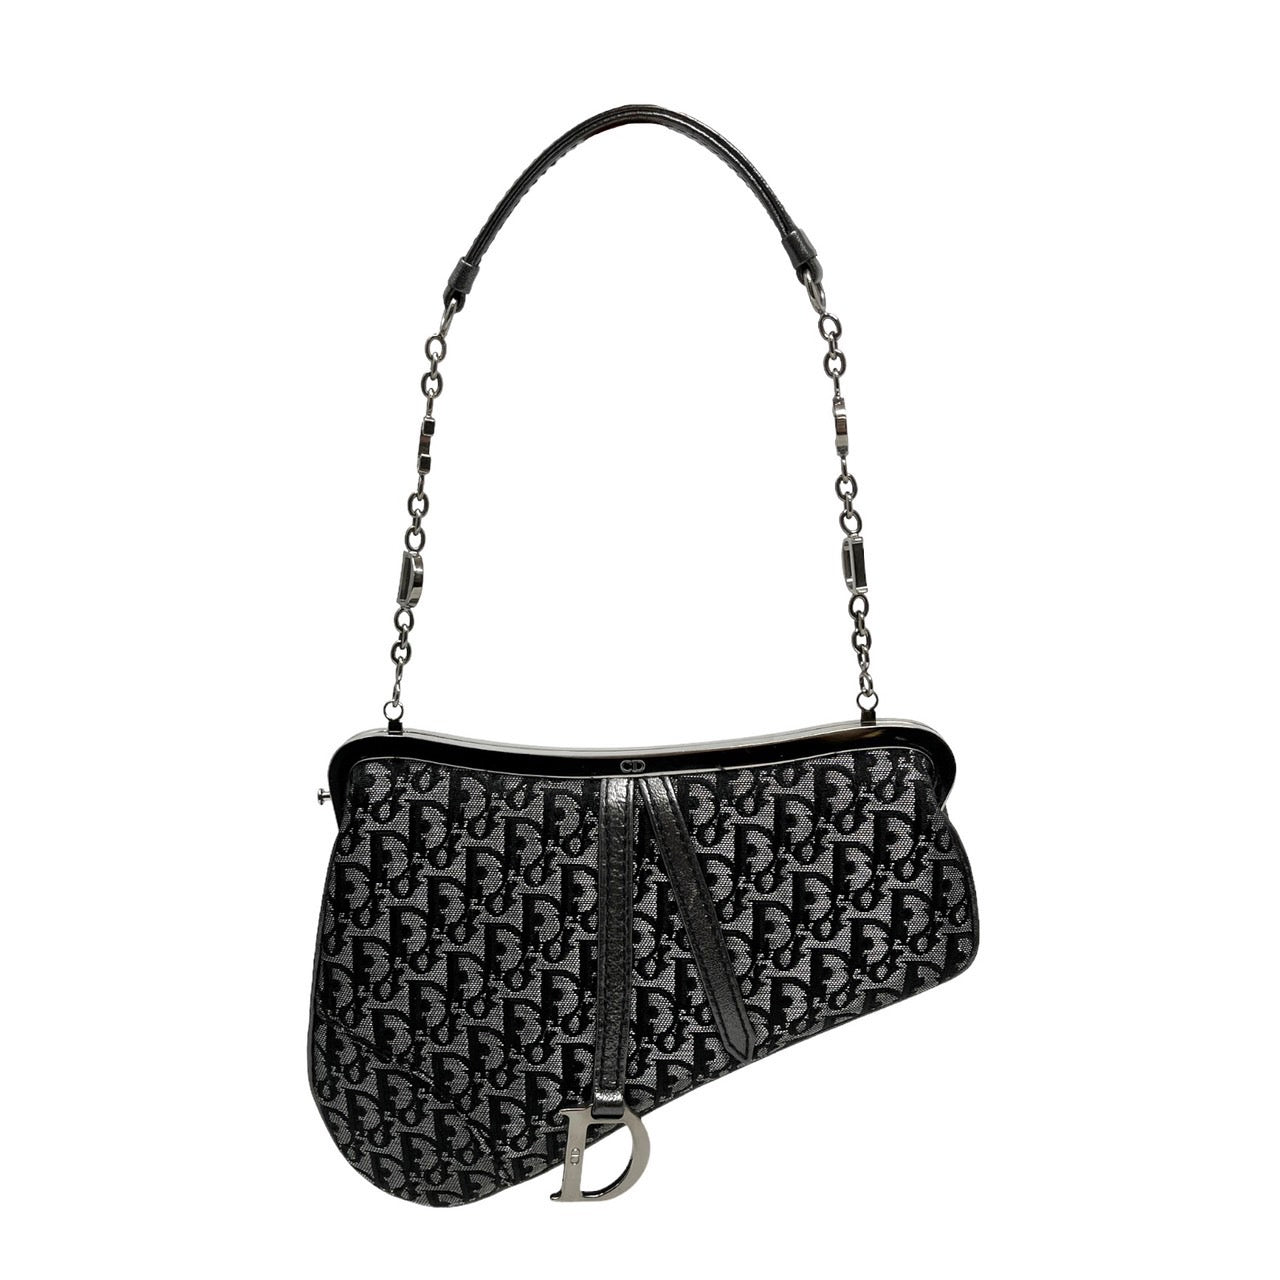 Buy Chanel Saddle Bag Online In India -  India